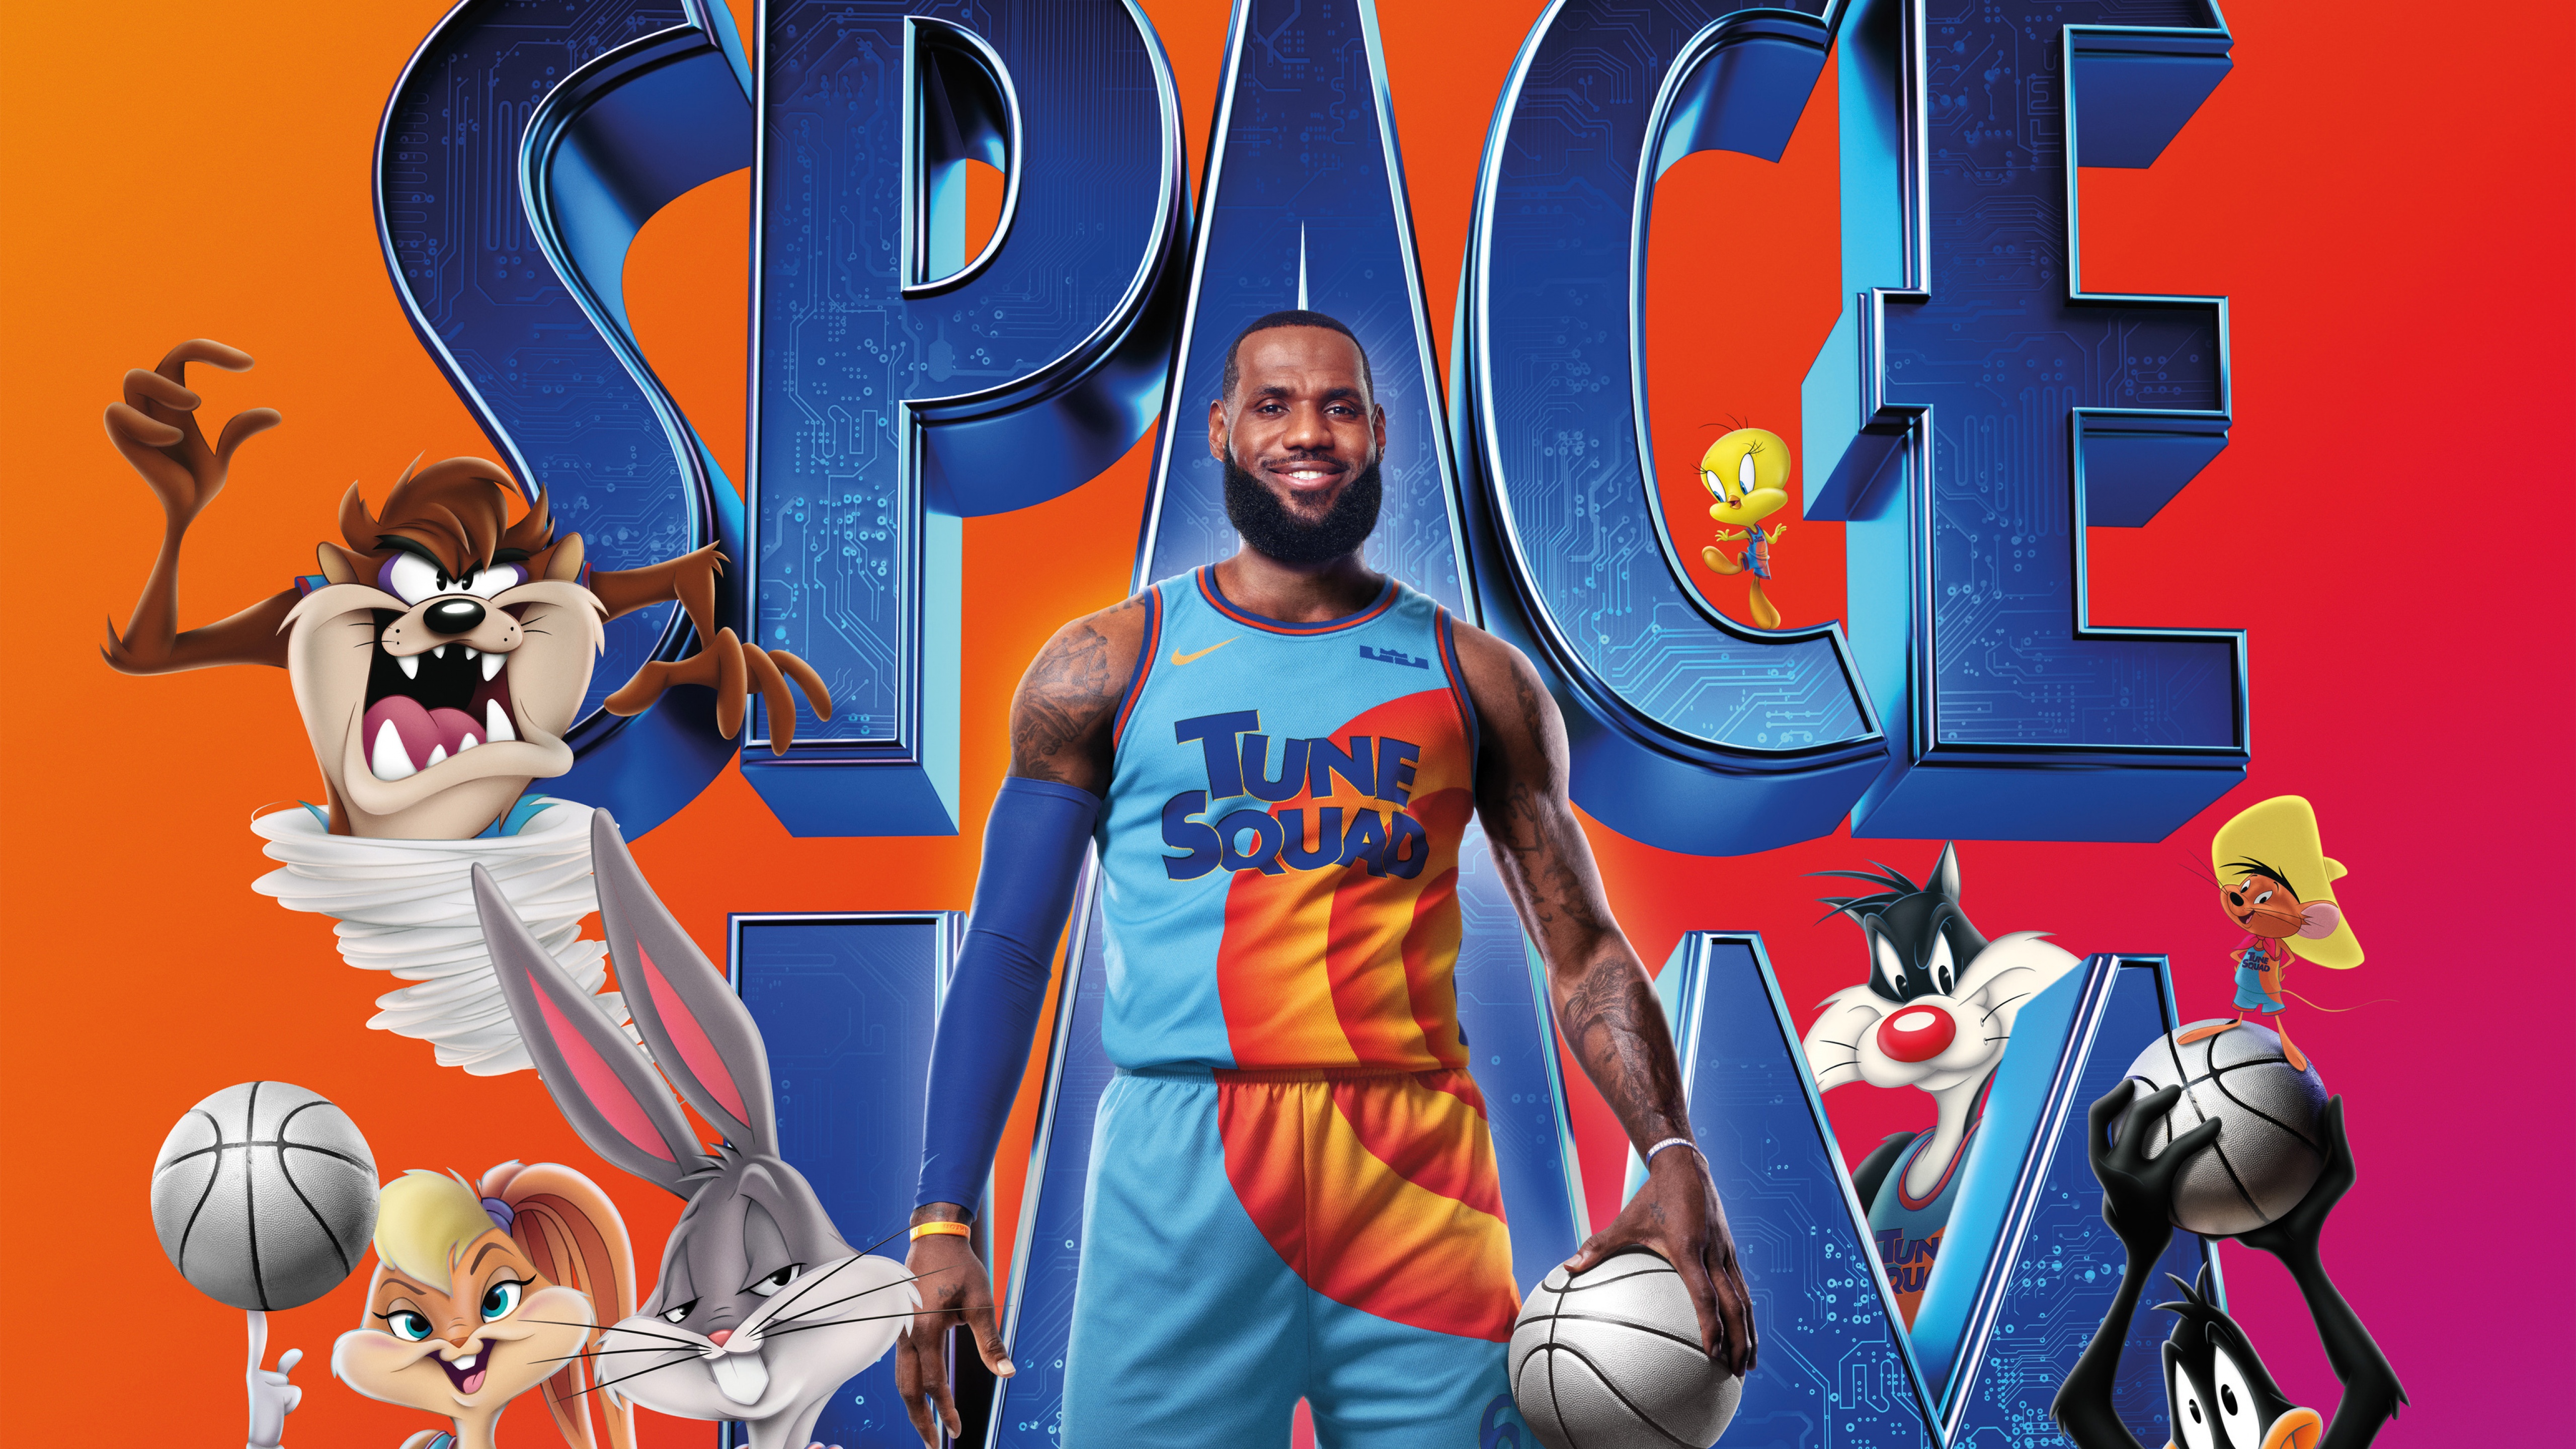 Space Jam: A New Legacy Wallpaper 4K, 2021 Movies, Comedy, Movies